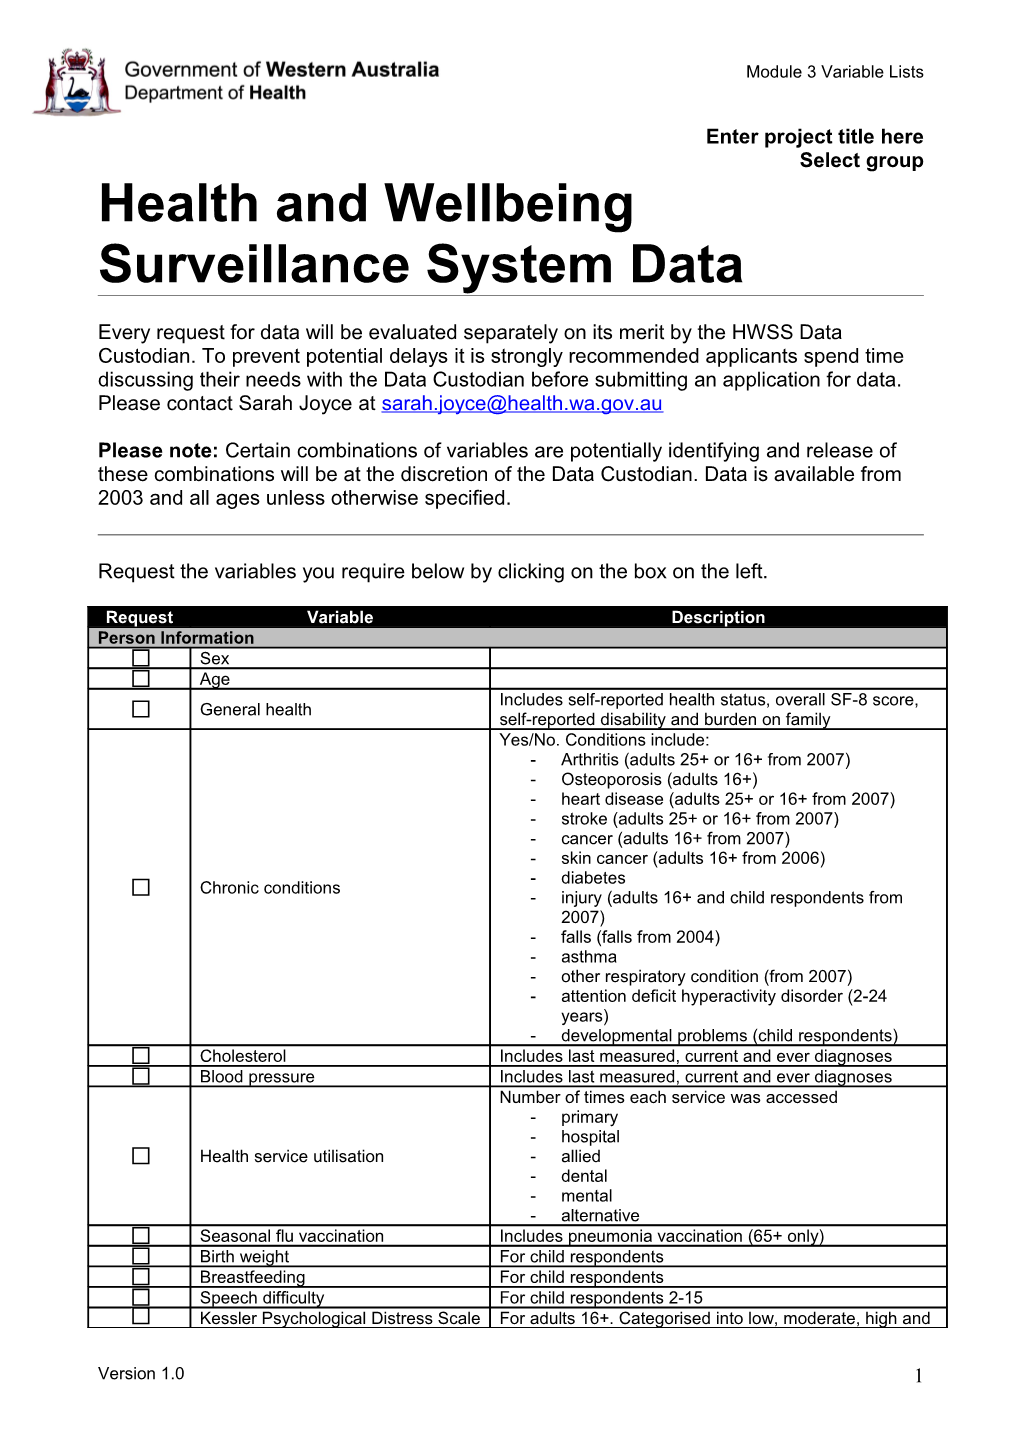 Health and Wellbeing Surveillance System Data